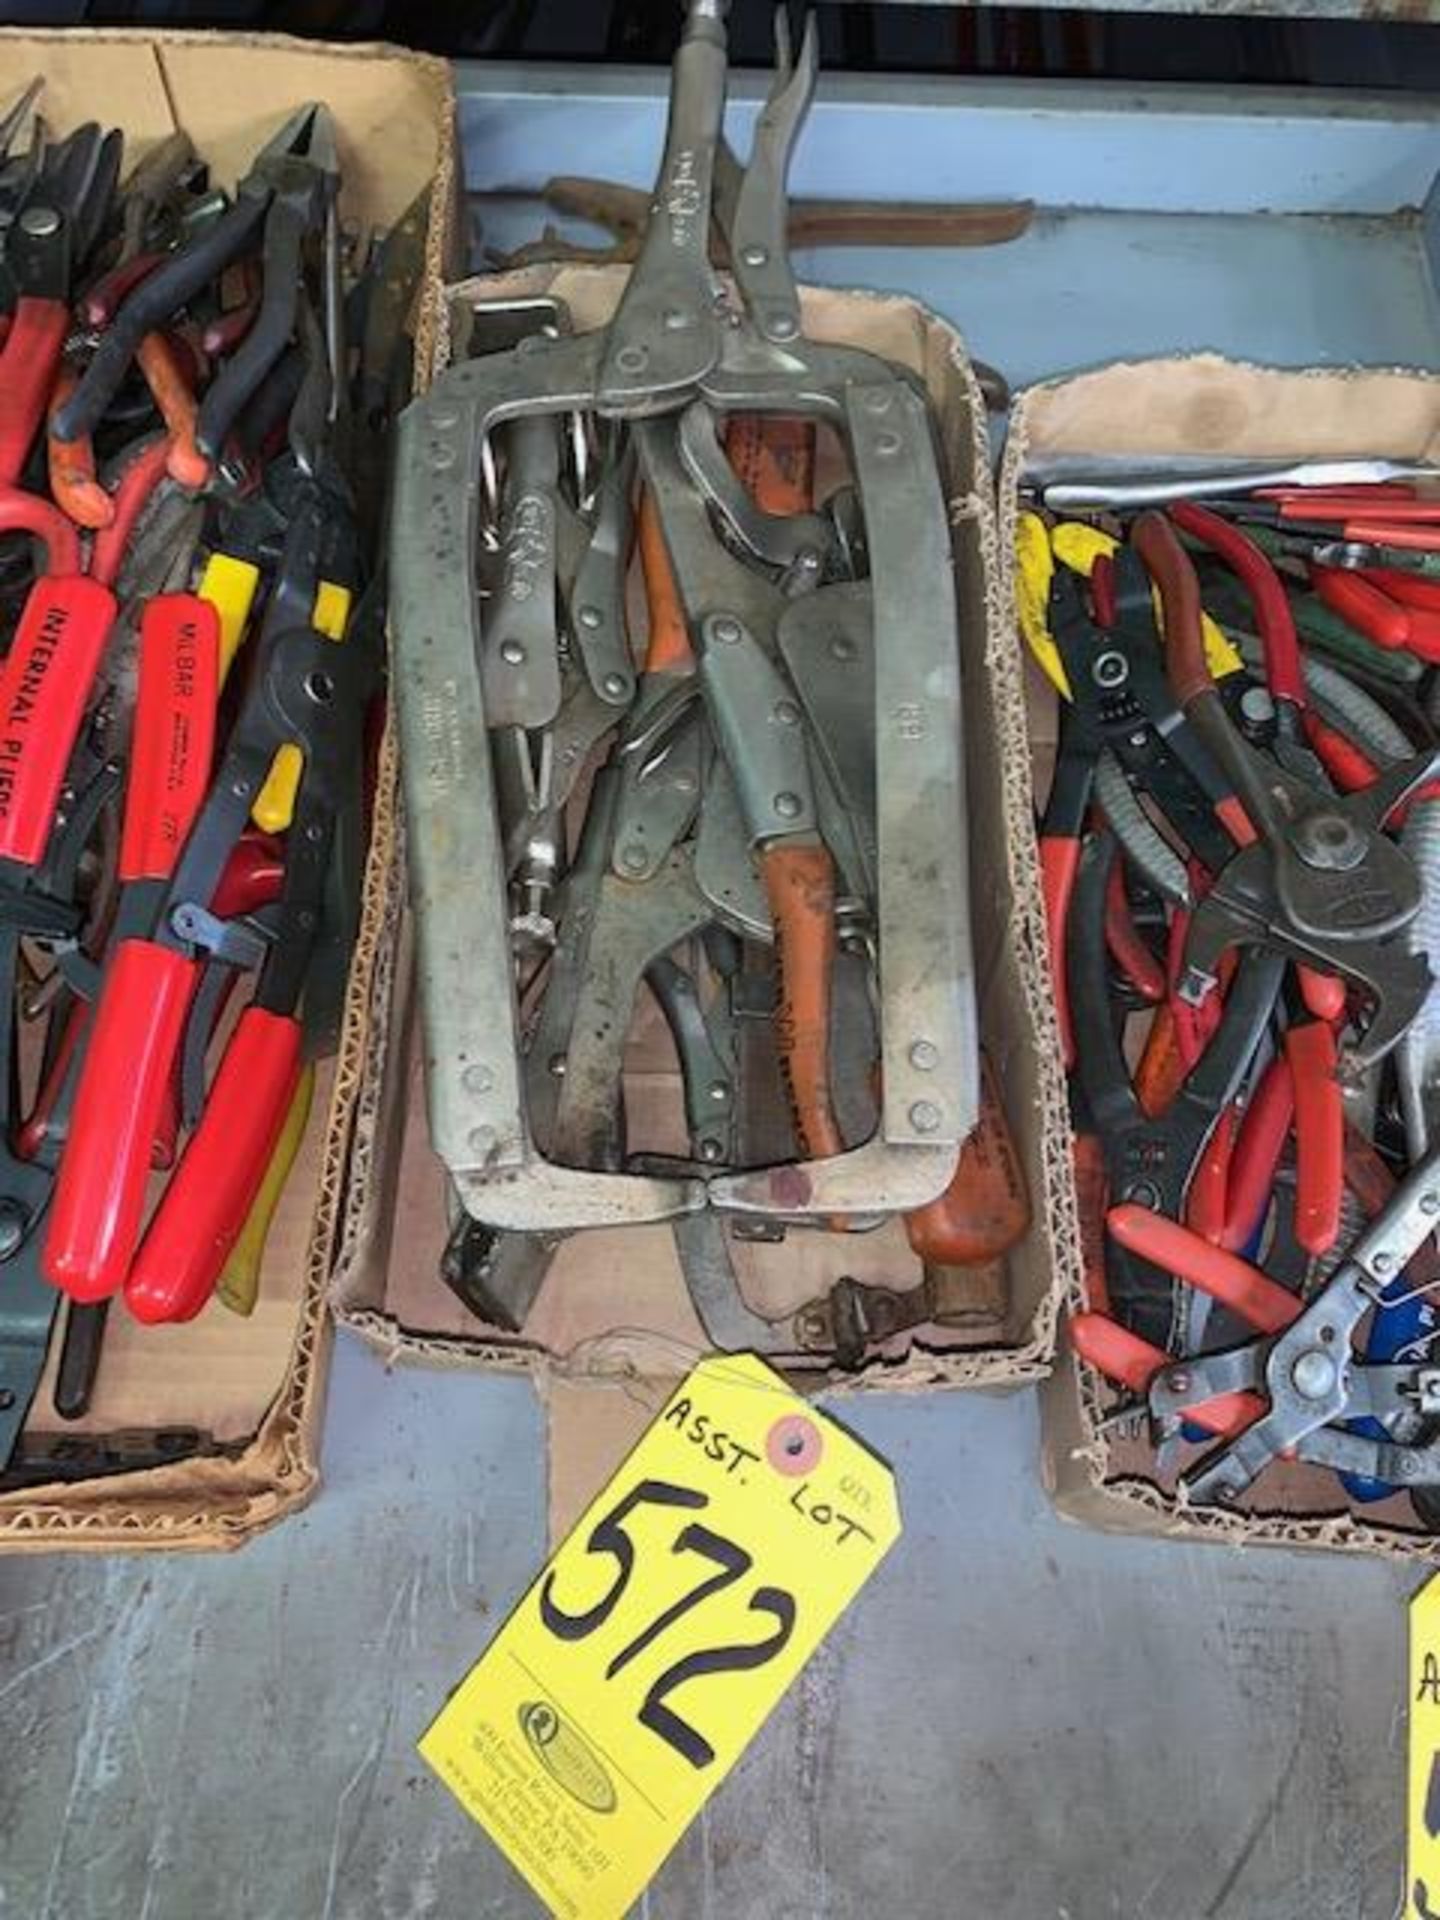 ASSORTED VISE GRIPS (3RD SHELF OF LOT 554 - RIGHT SIDE)